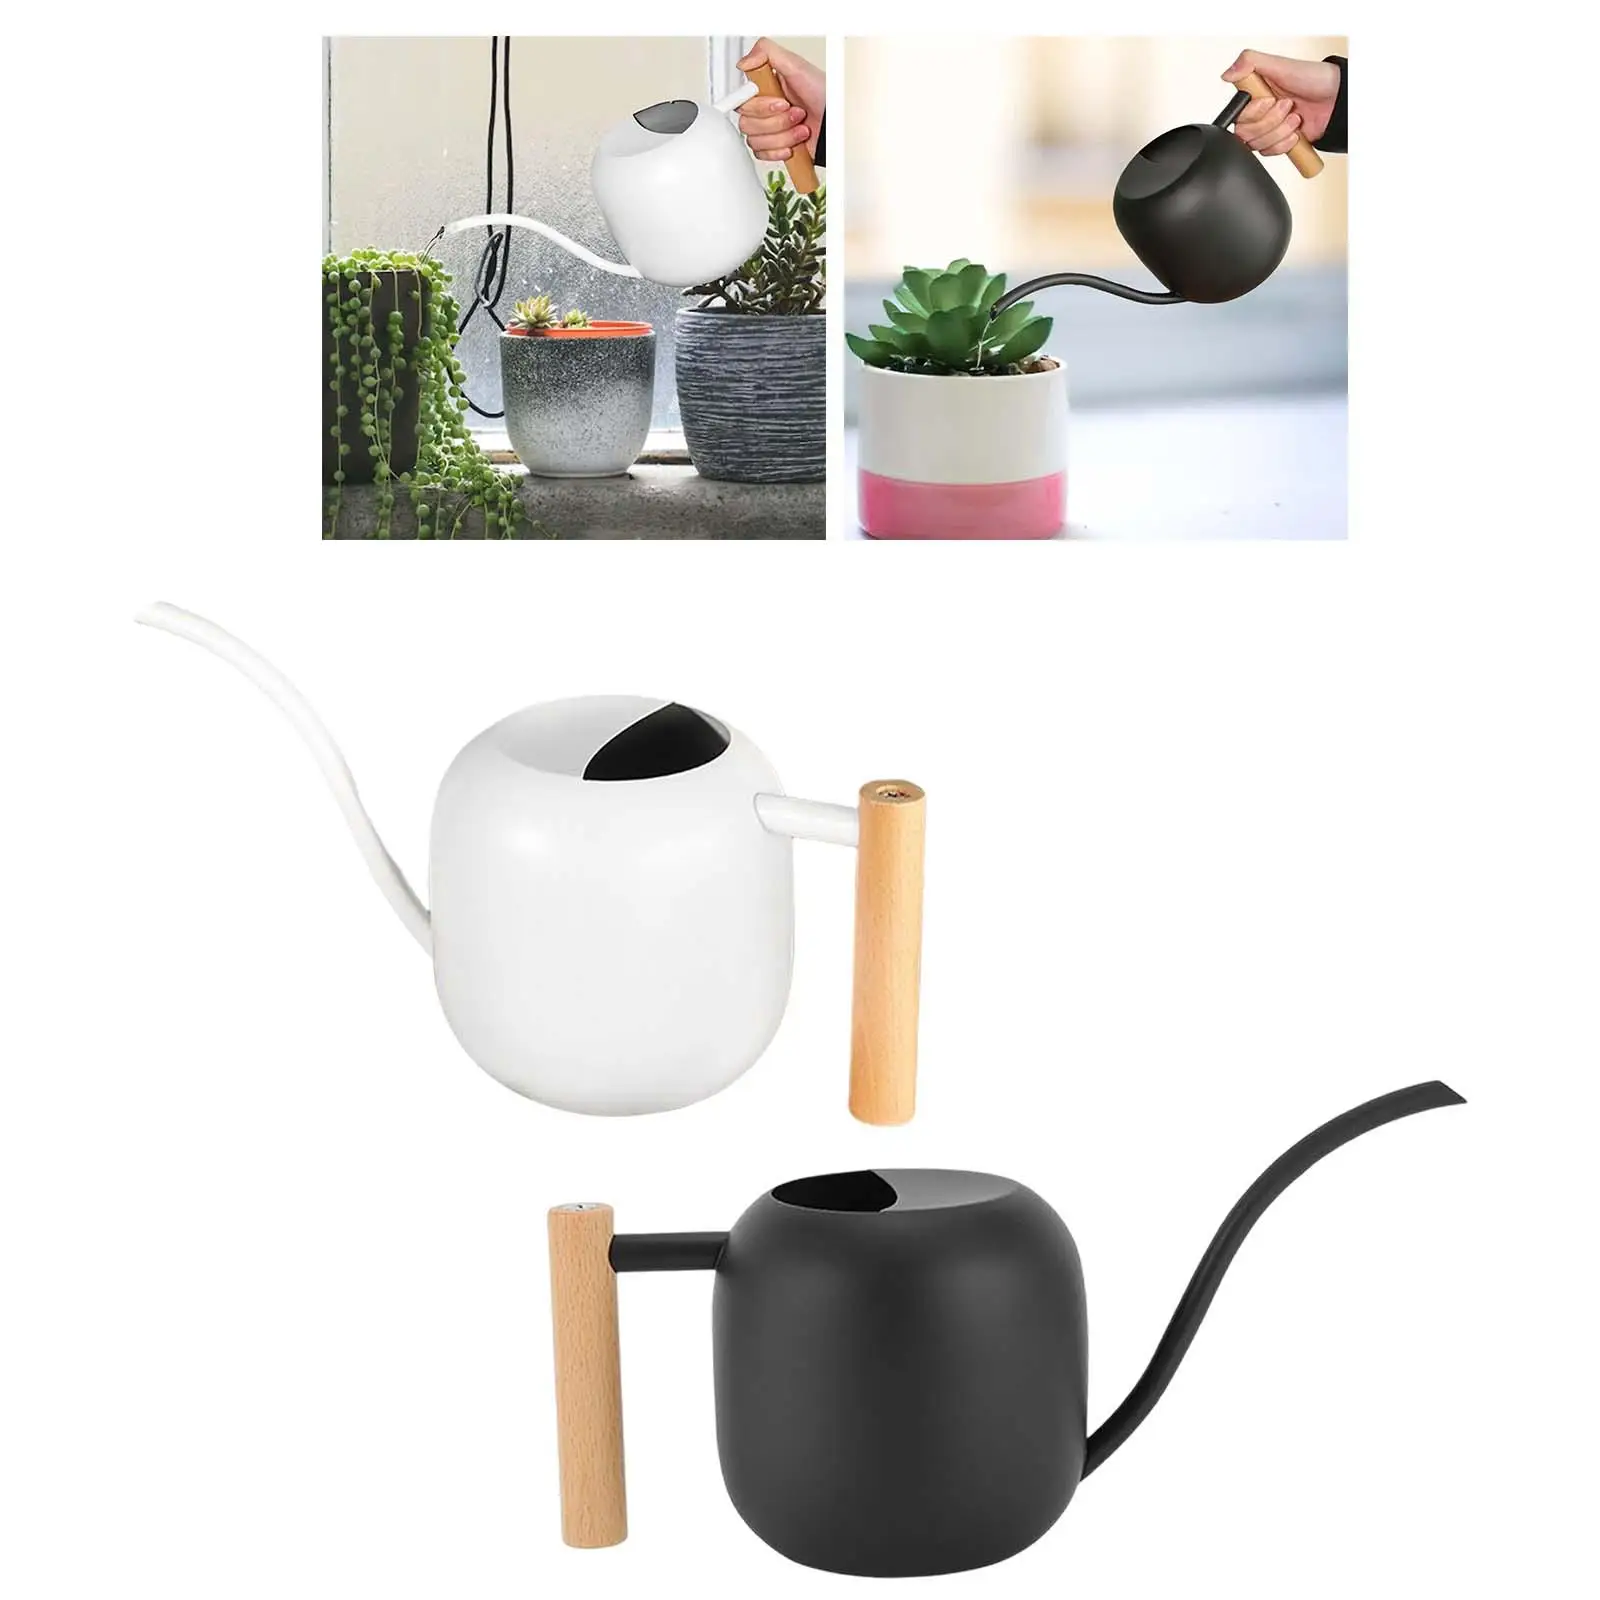 Stainless Steel Watering Can with Long Mouth,1.2L Watering Pot,Watering Flower Kettle for Bonsai Garden Shower Indoor Decor